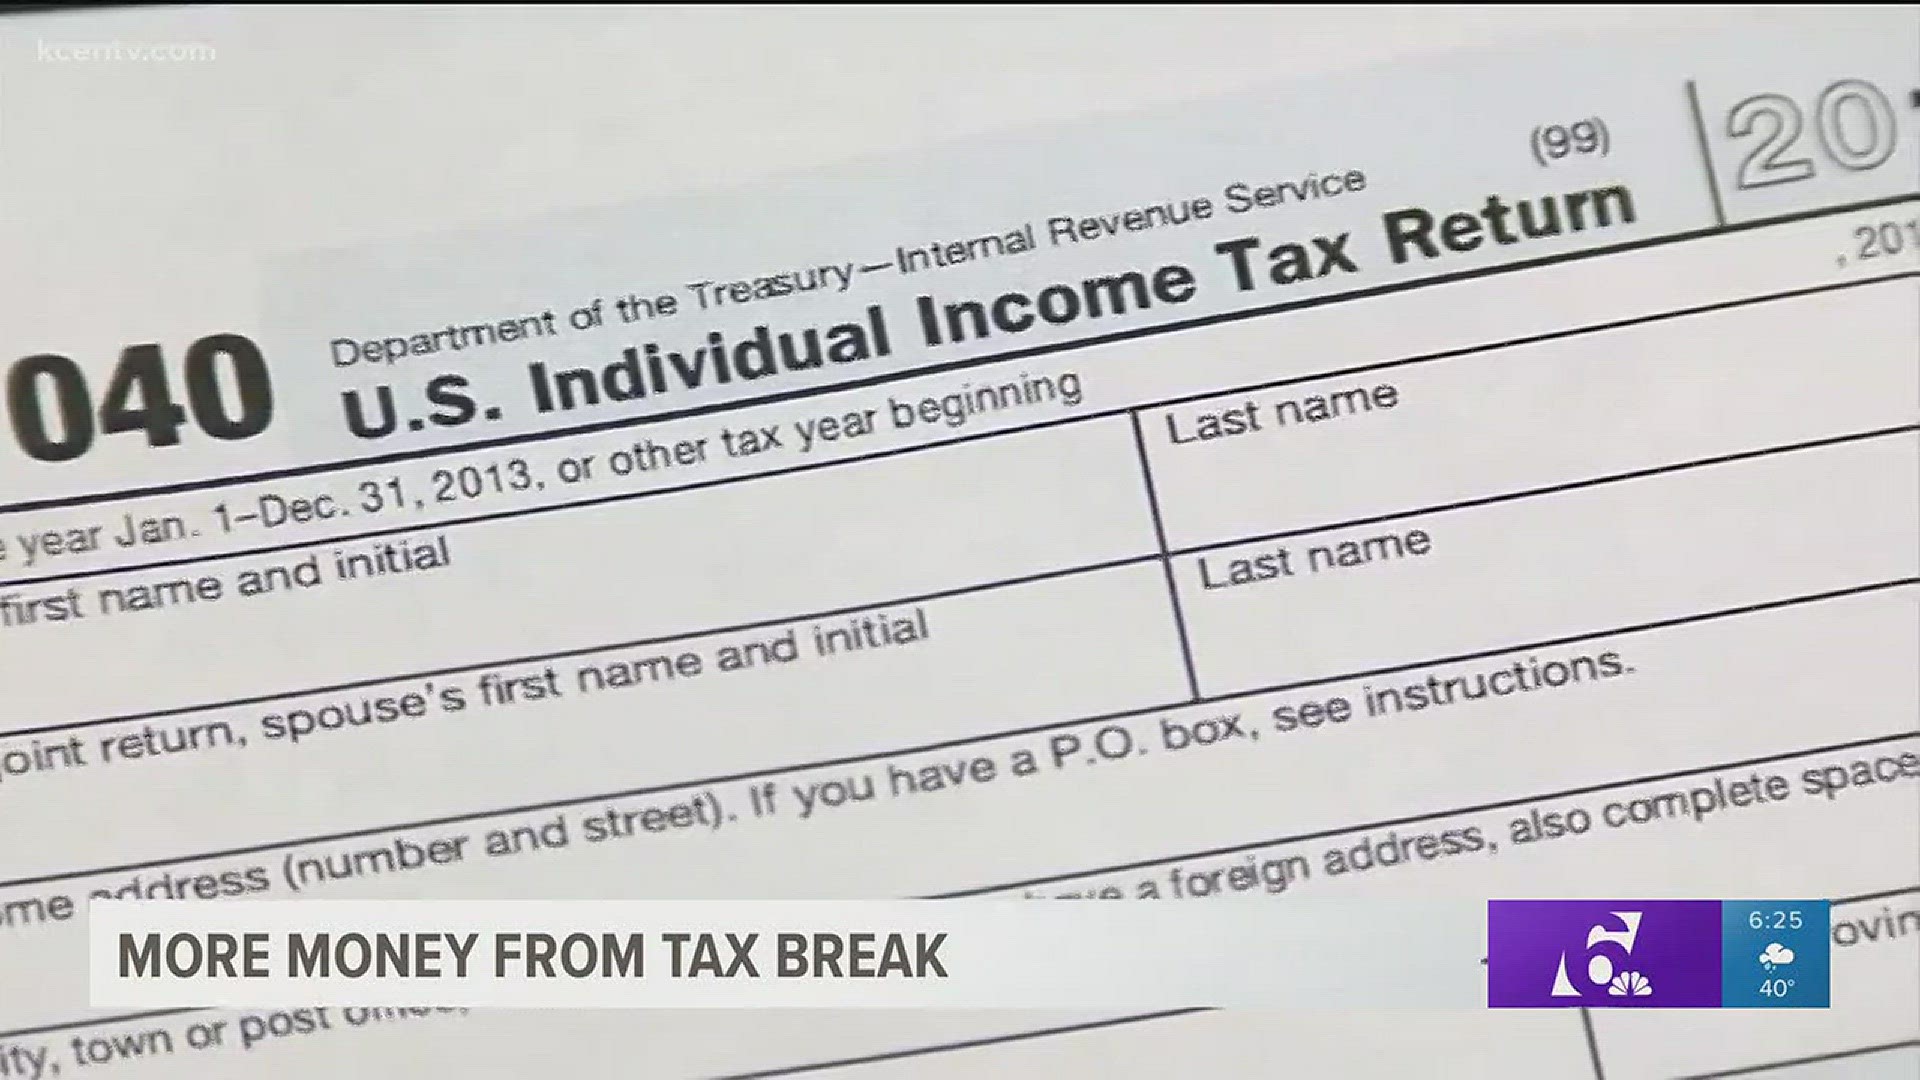 The new tax took effect earlier this year and we wanted to find out what it means for the average family.